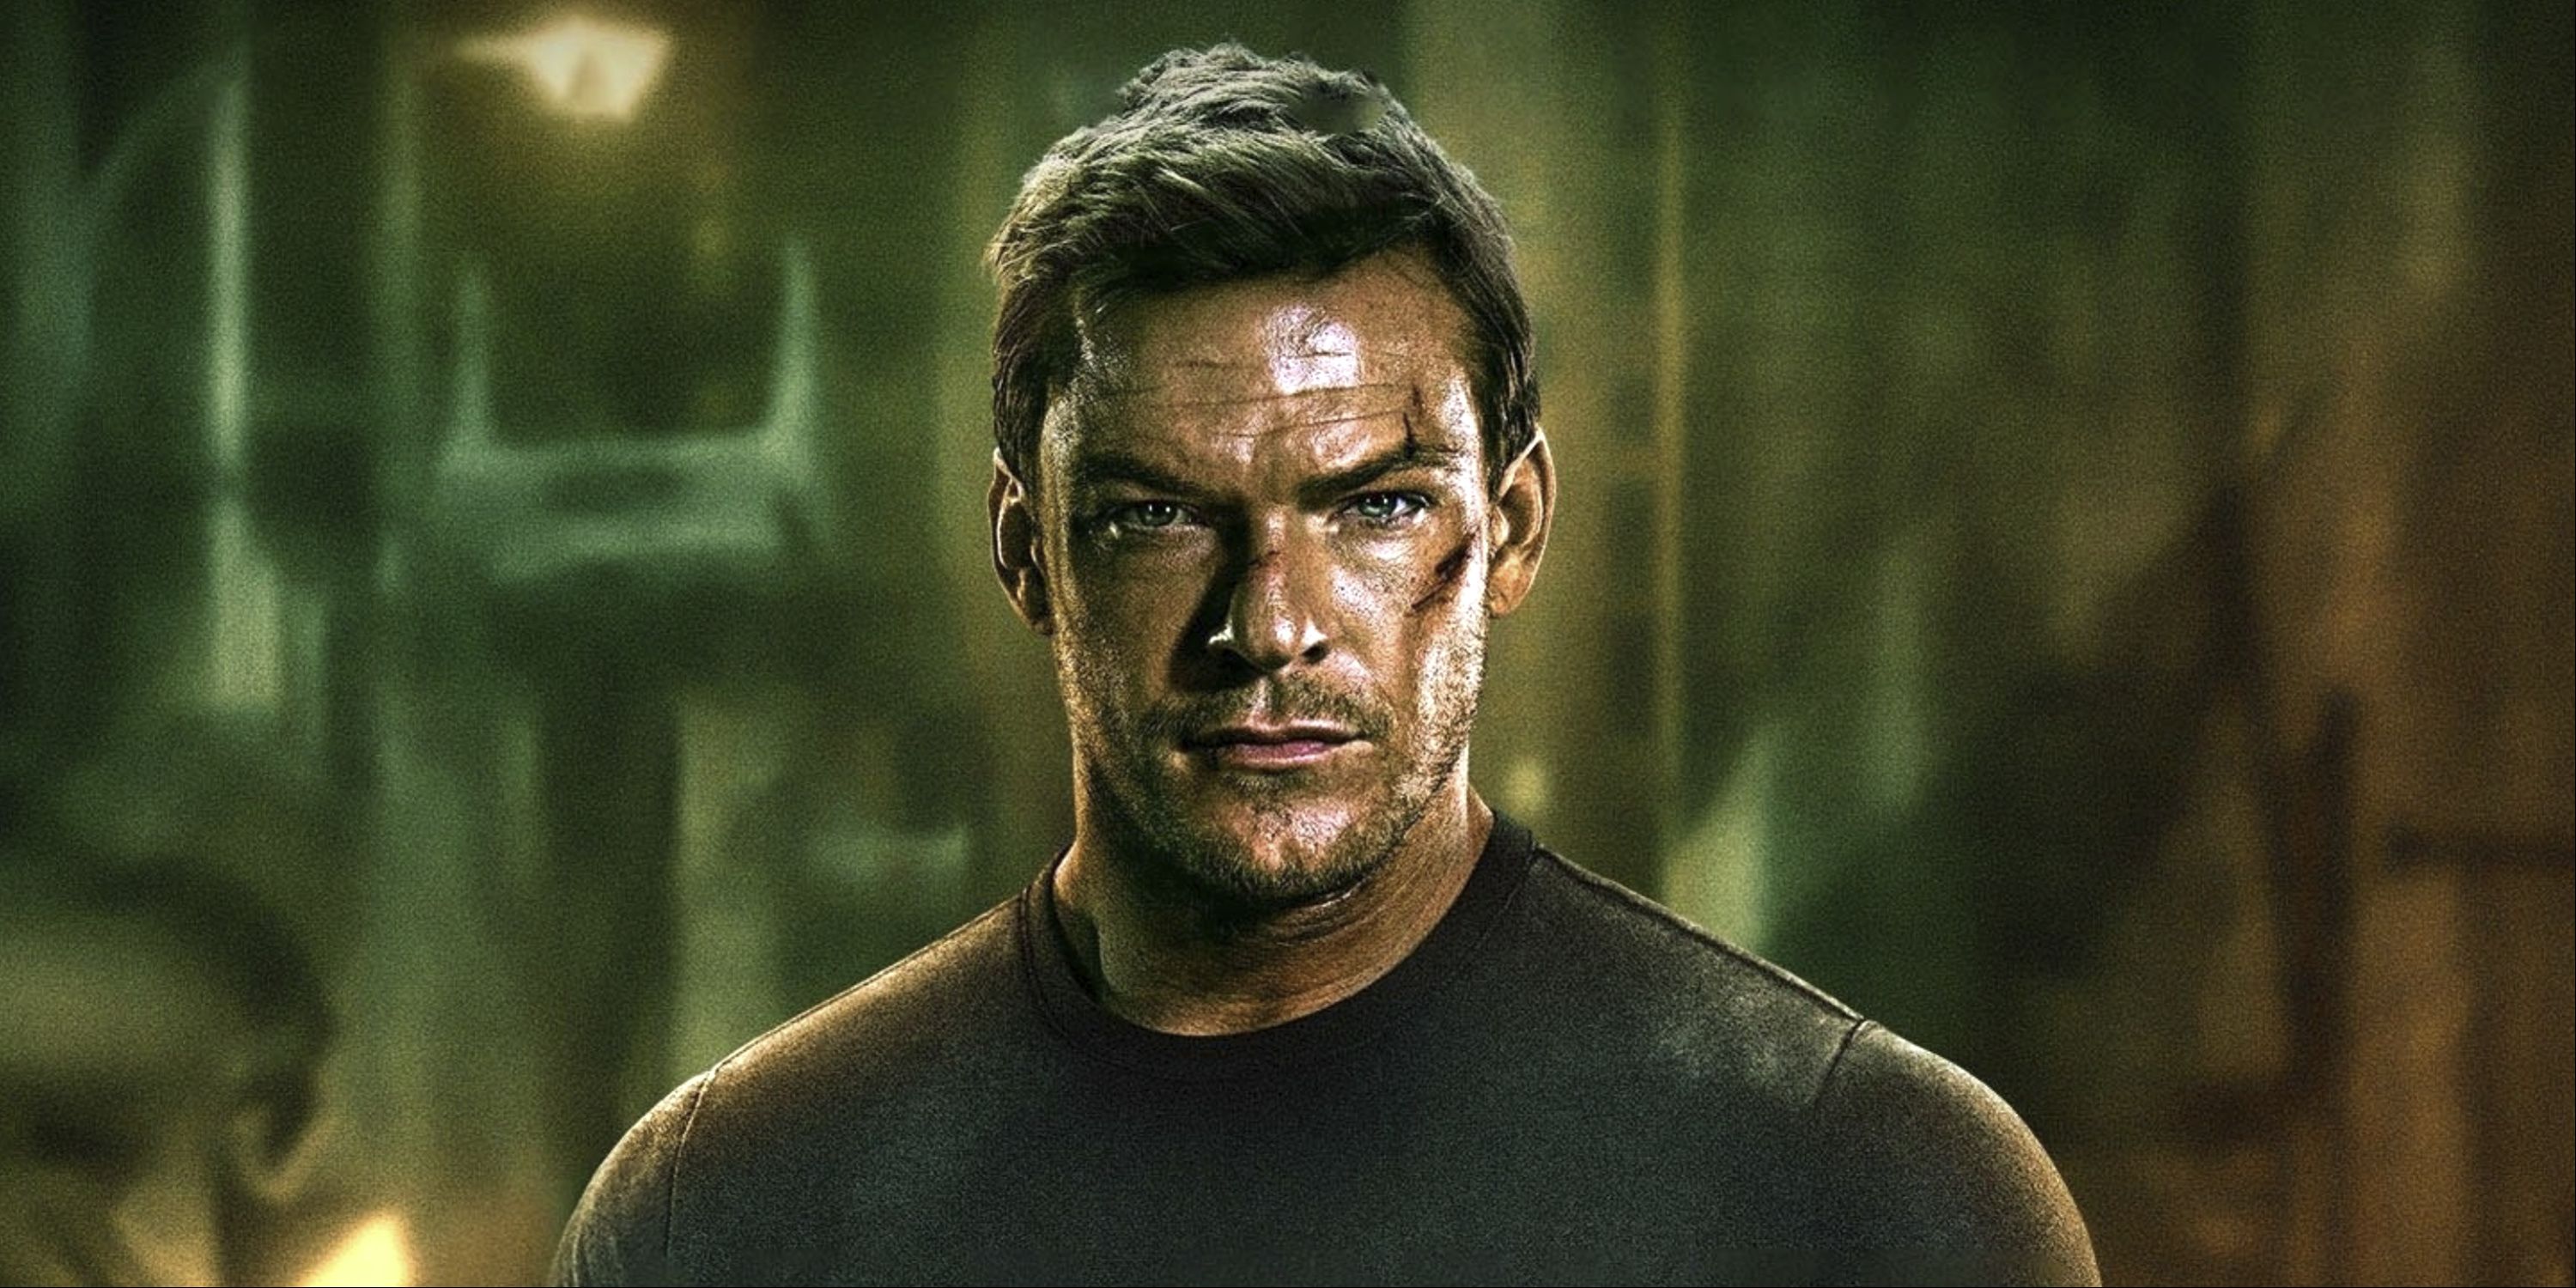 Alan Ritchson as Jack Reacher looking menacing with cuts on his face